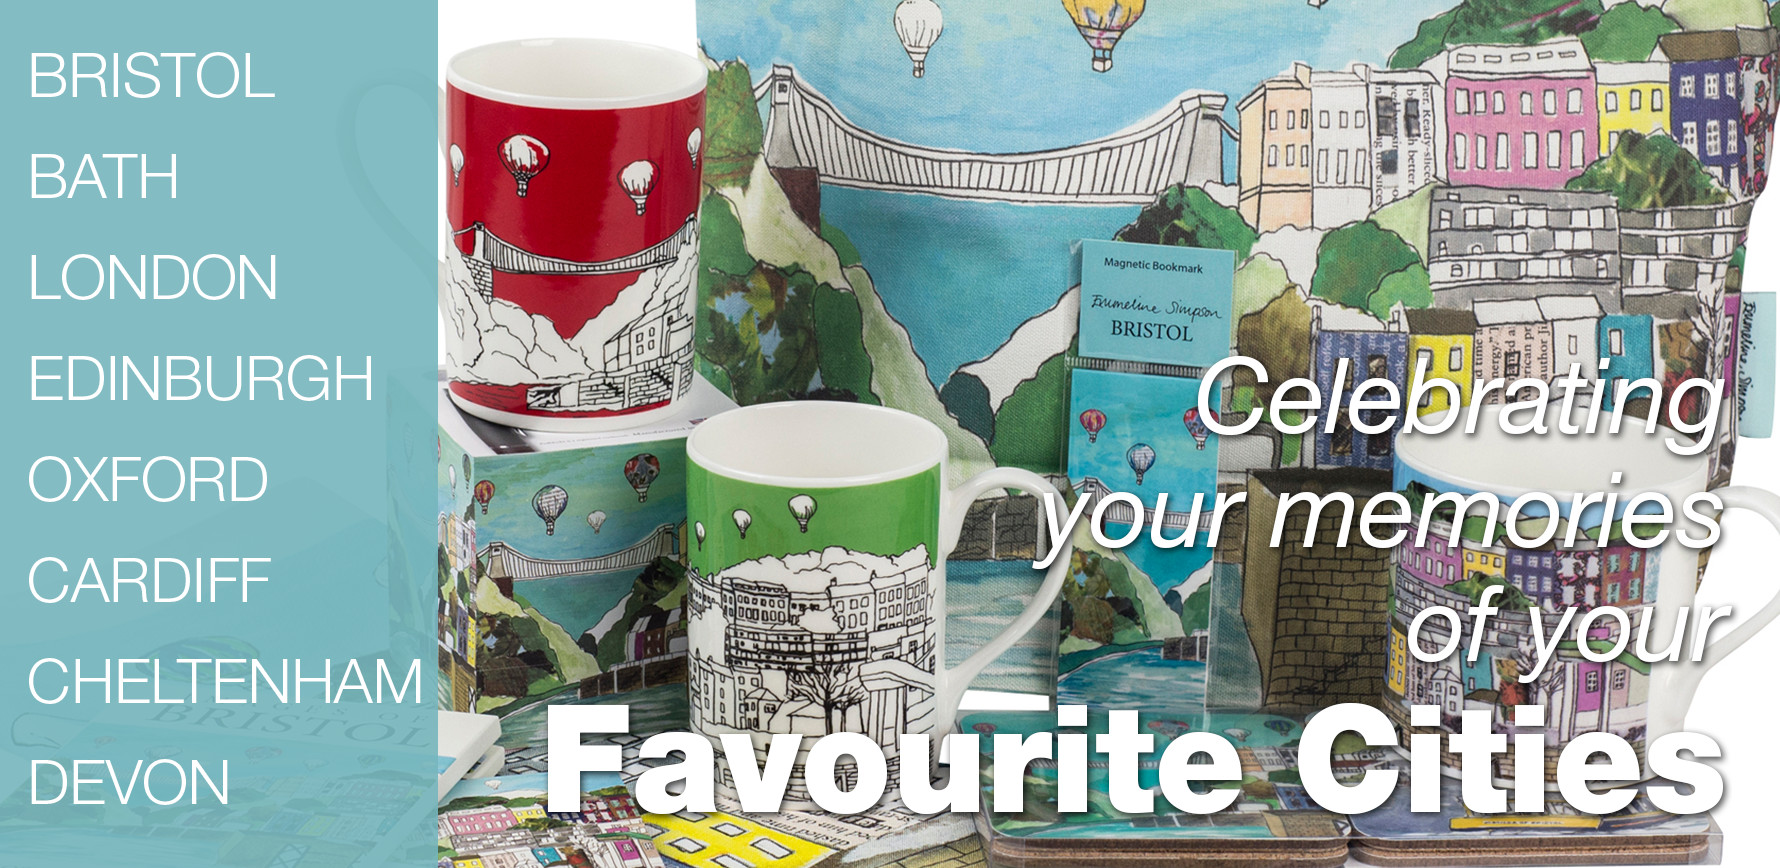 Celebrating your memories of your favourite cities